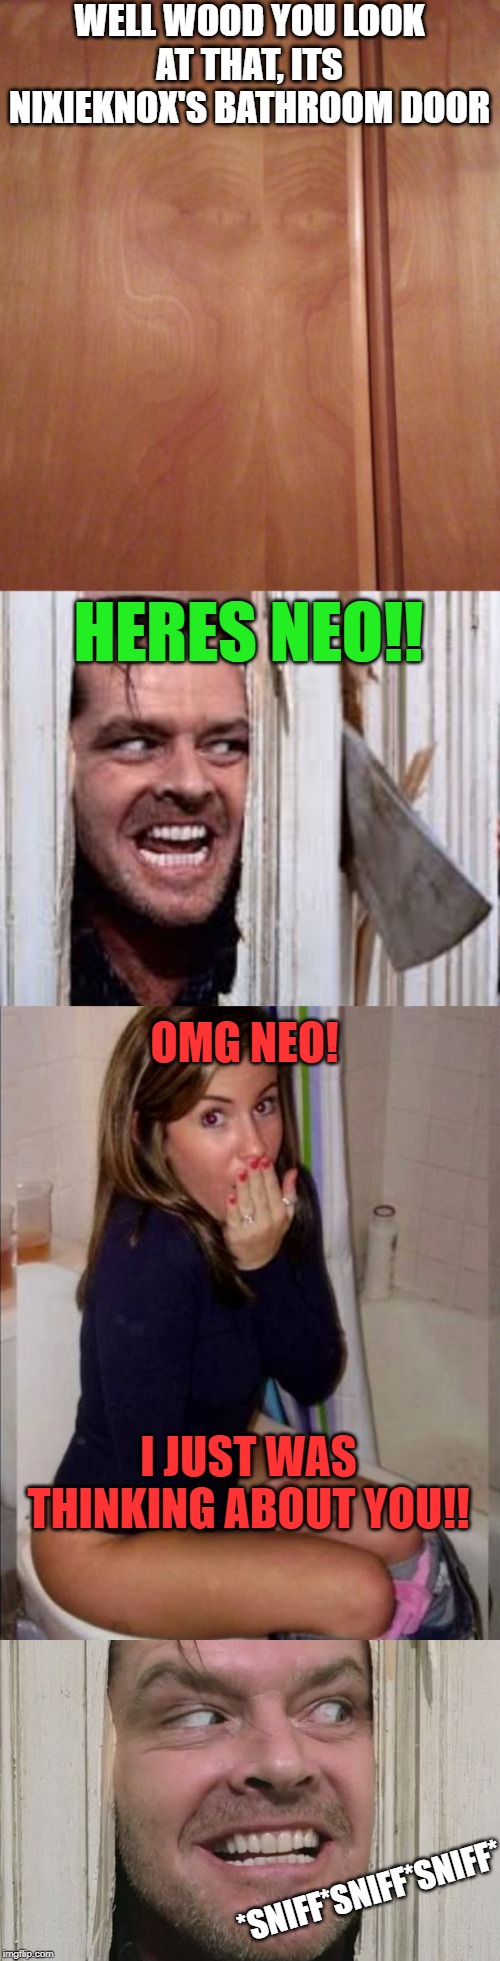 WELL WOOD YOU LOOK AT THAT, ITS NIXIEKNOX'S BATHROOM DOOR *SNIFF*SNIFF*SNIFF* HERES NEO!! OMG NEO! I JUST WAS THINKING ABOUT YOU!! | made w/ Imgflip meme maker